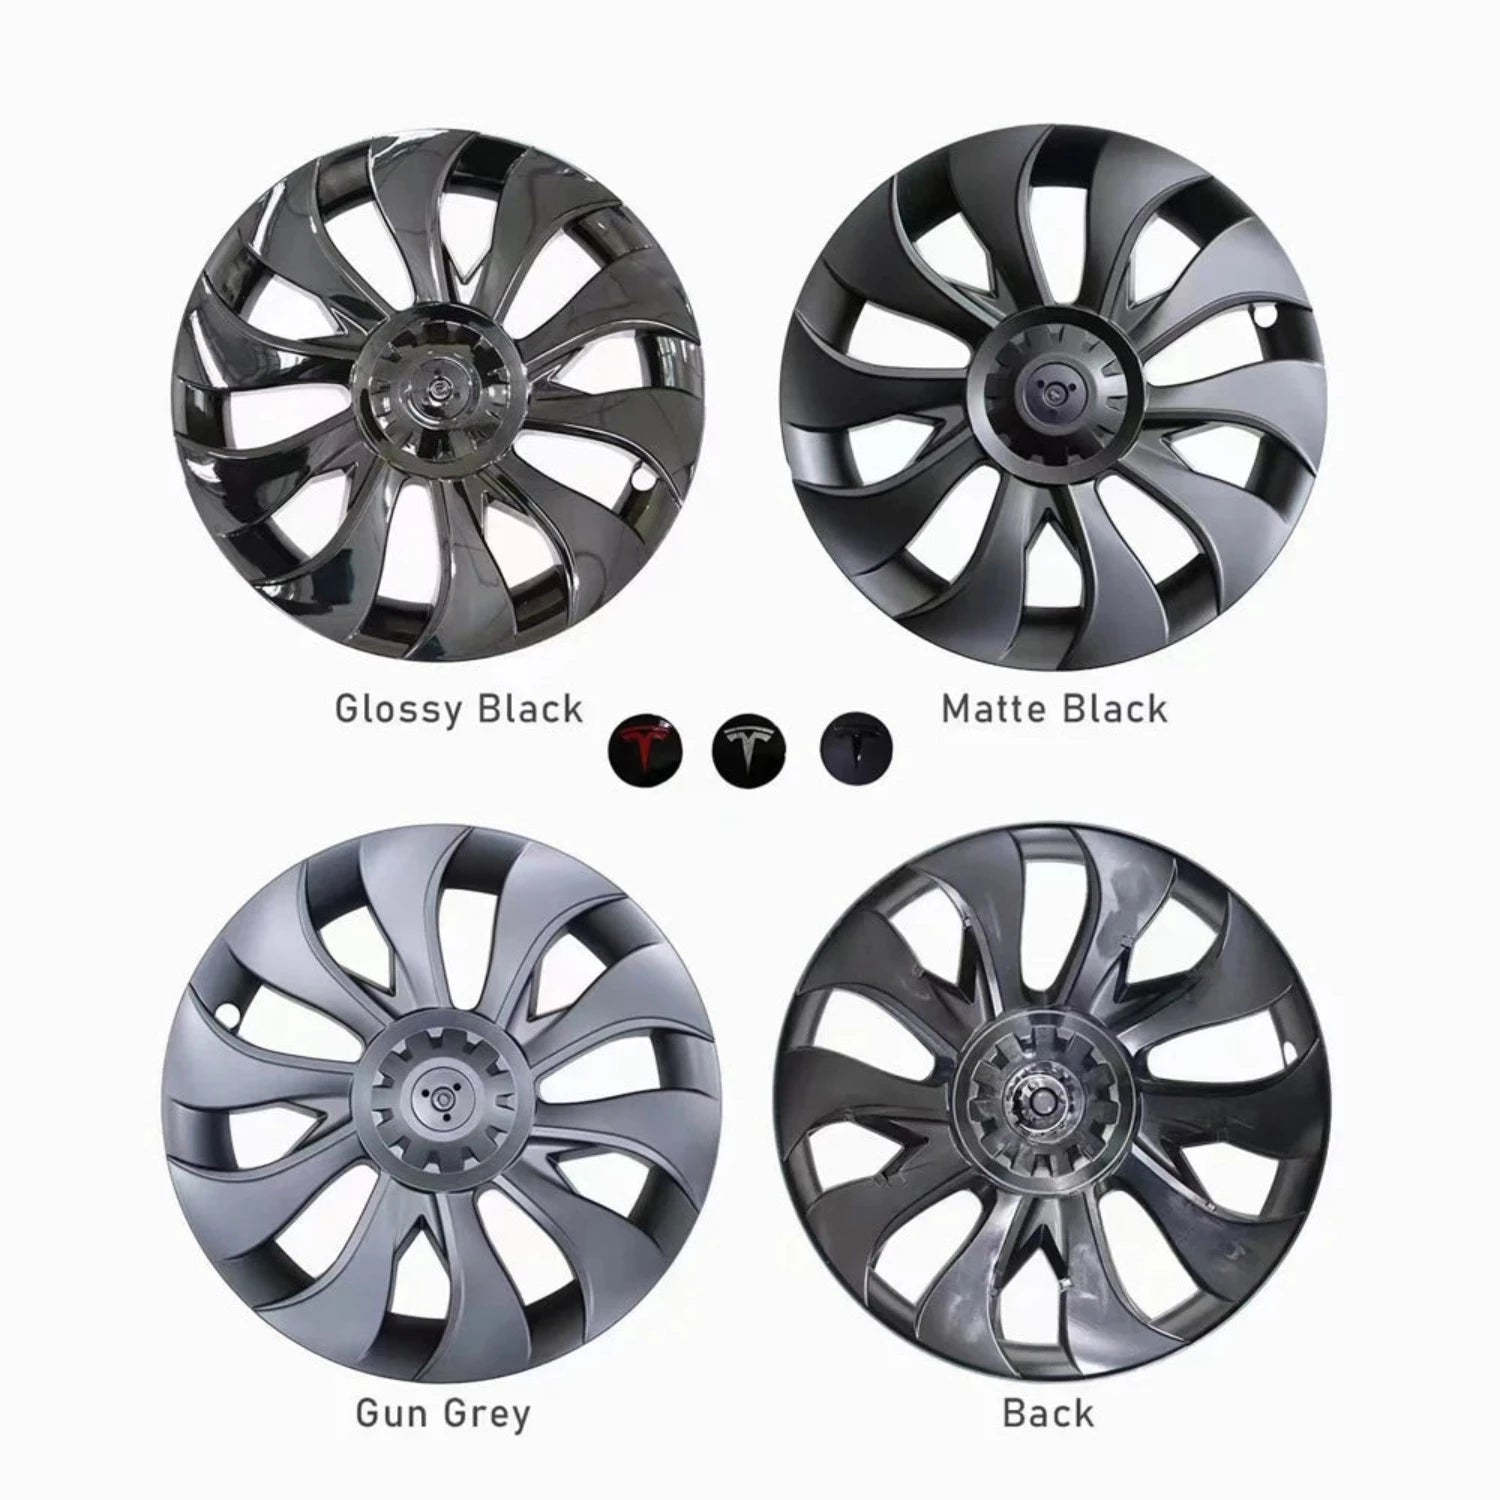 18'' Whirlwind Type A Hubcap For Tesla Model 3